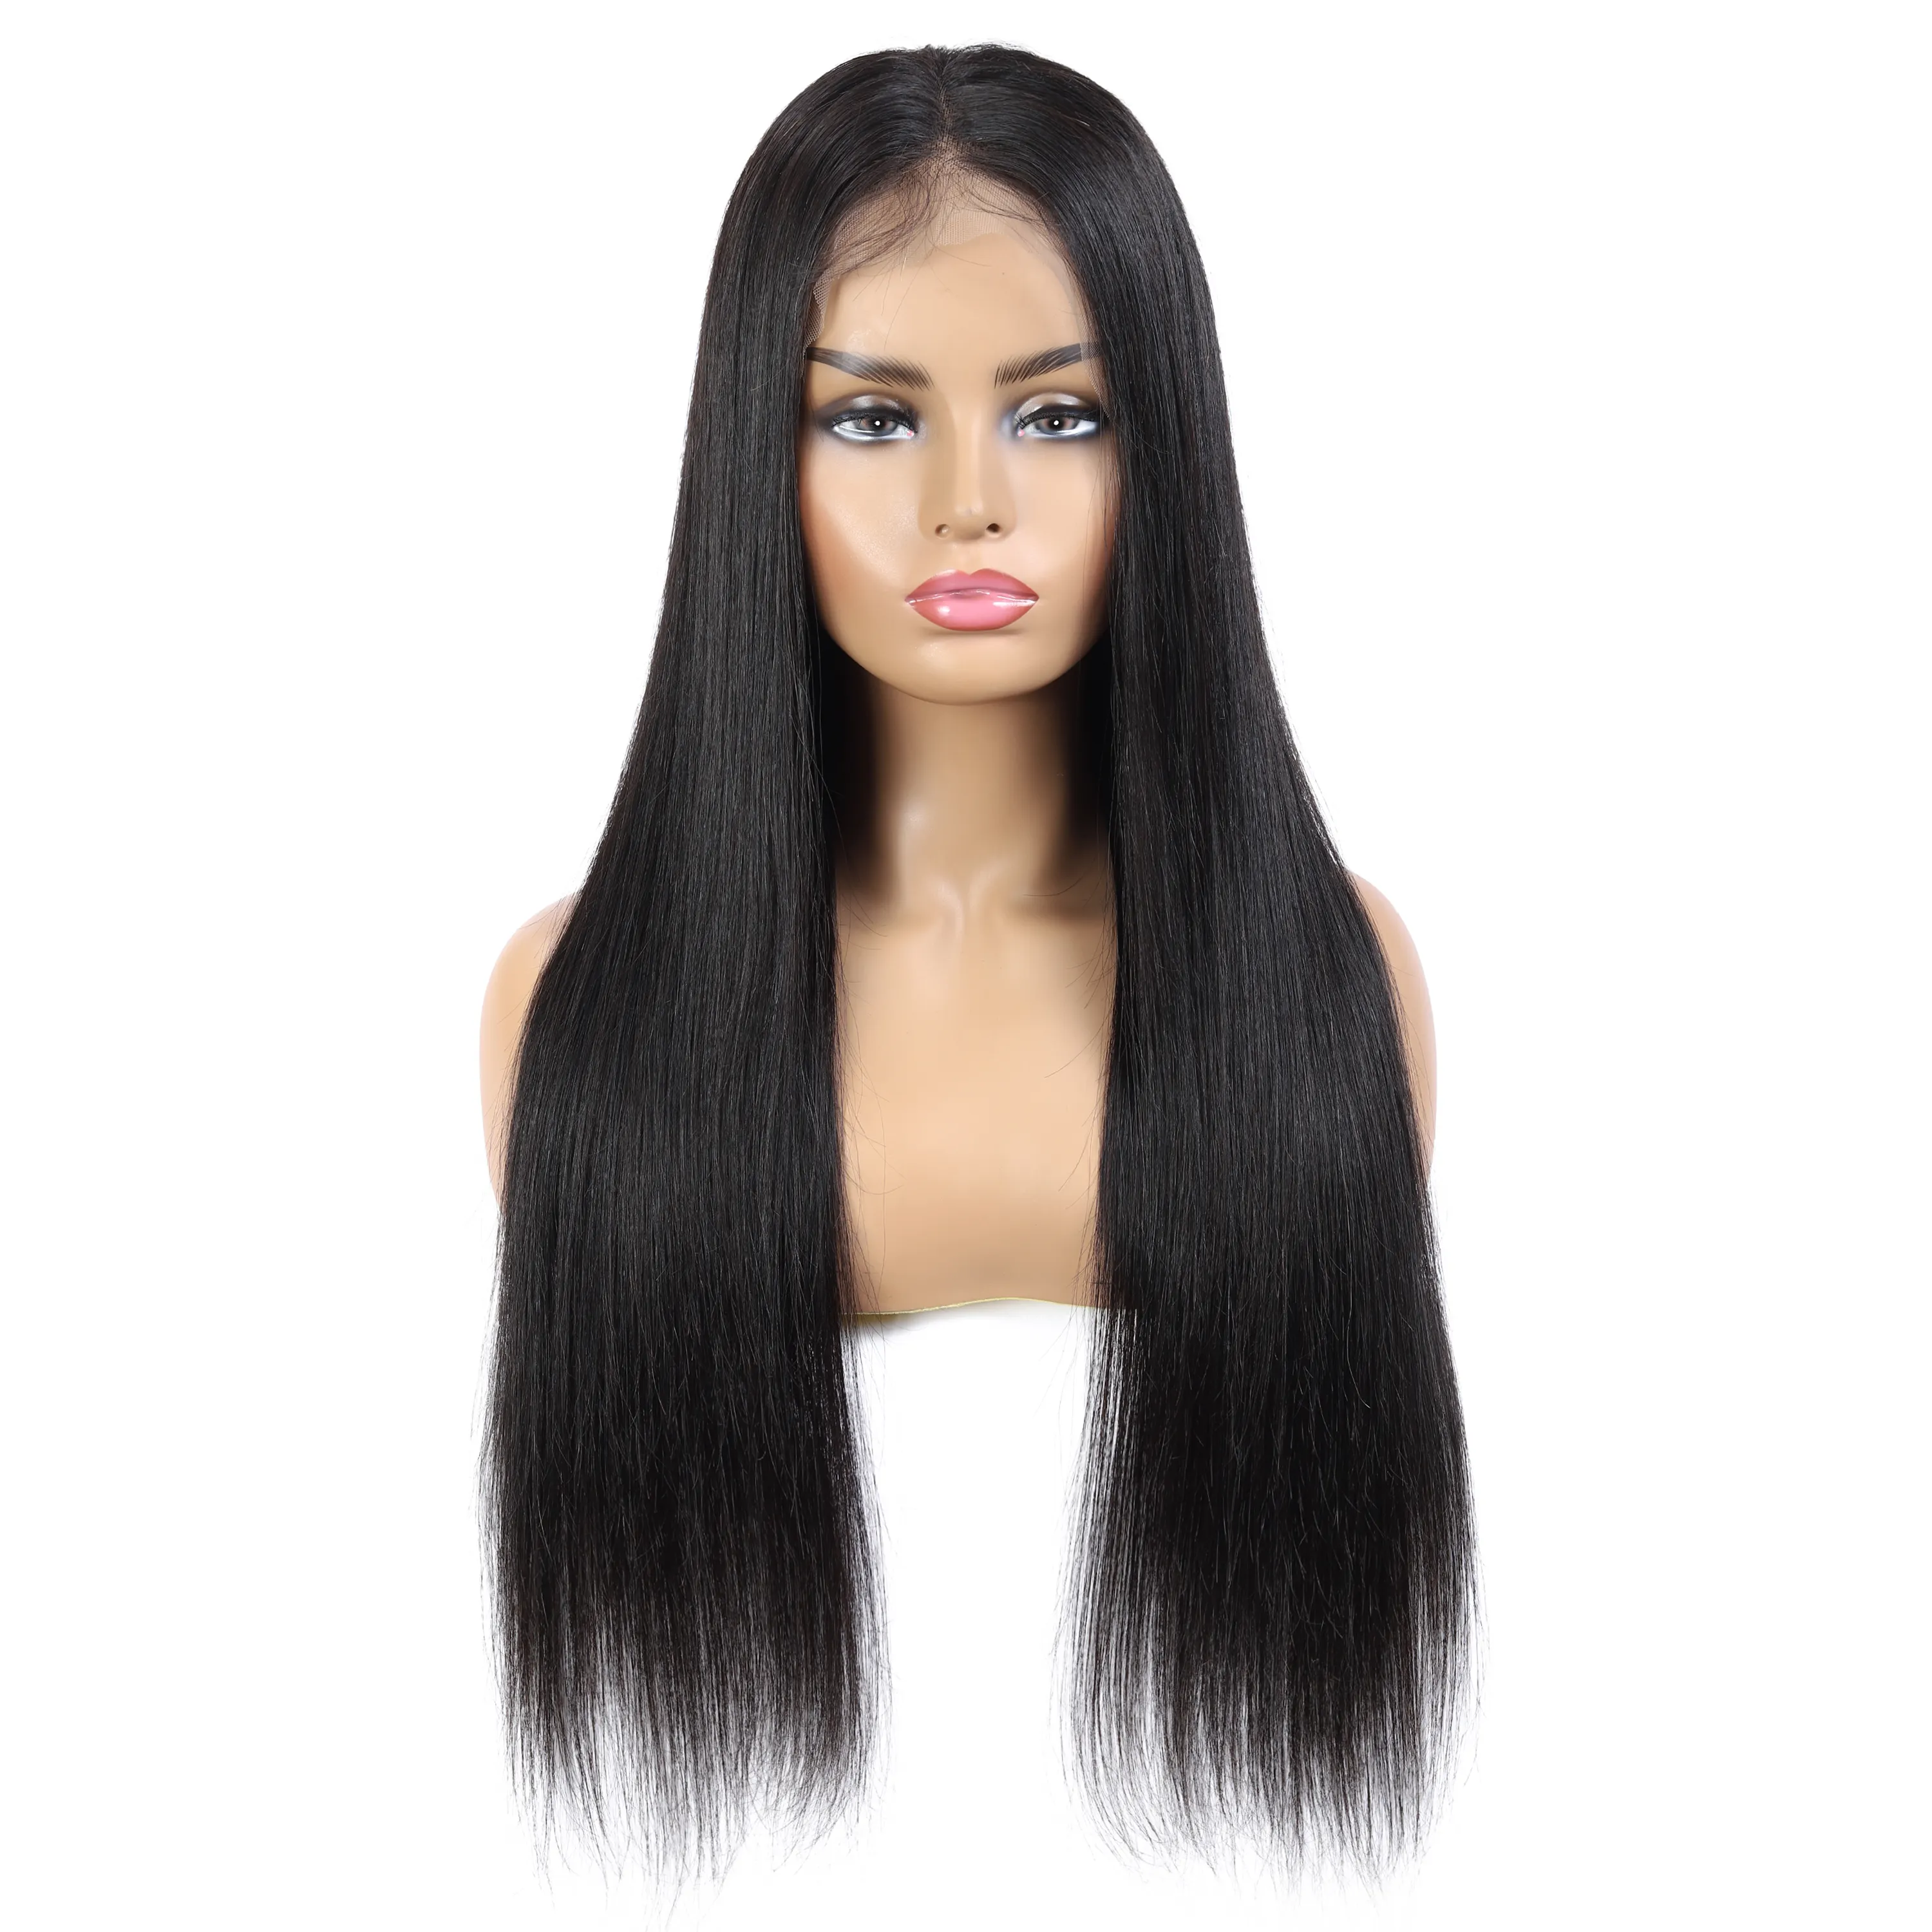 Real Human Hair Wigs Wet and Wavy Ombre Color Human Hair Lace Front Closure Black Wig With Baby Hair